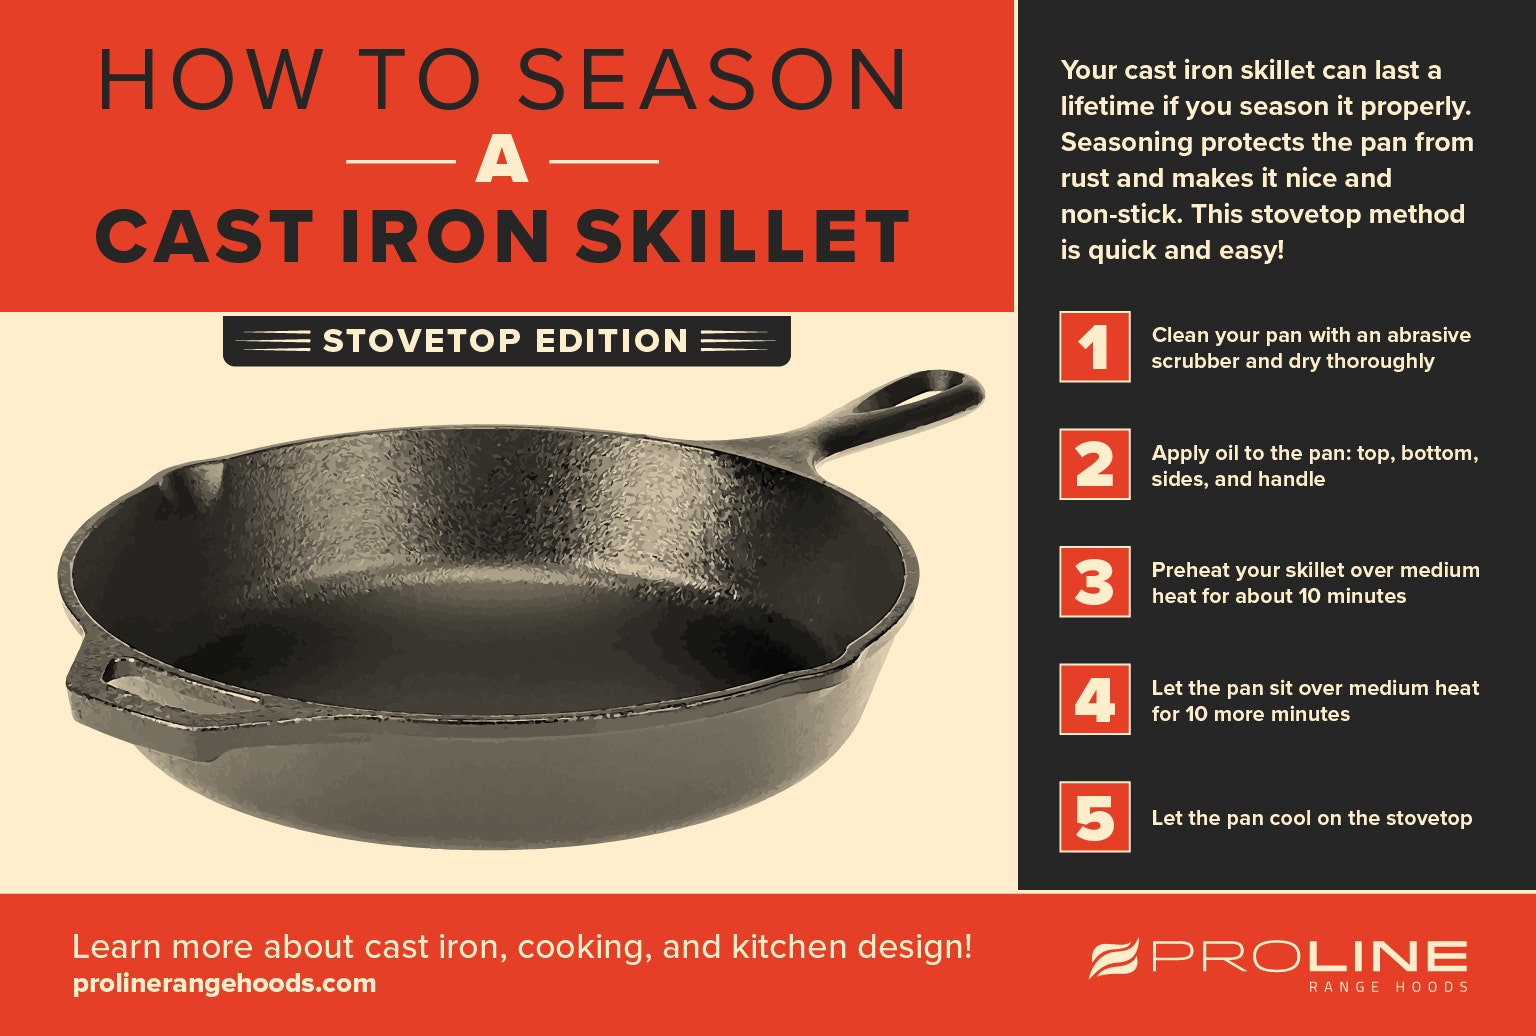 How to Season a Cast Iron Skillet on the Stovetop